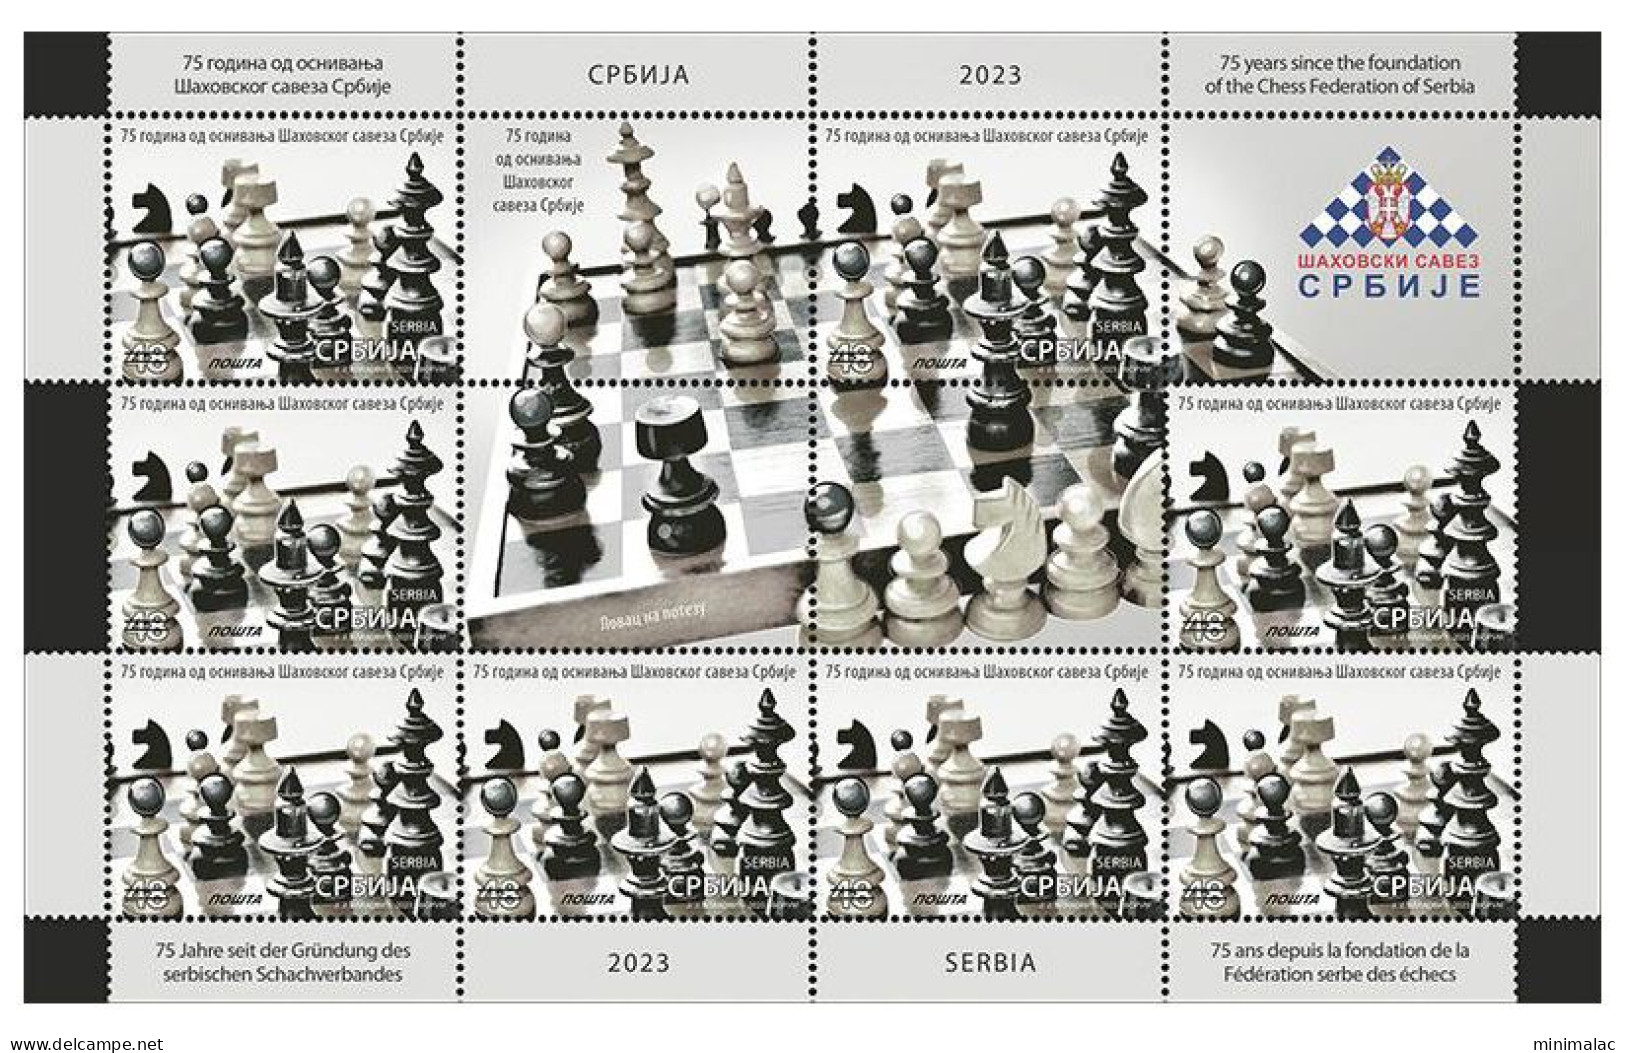 Serbia 2023. 75 Years Since The Foundation Of The Chess Federation Of Serbia, Mini Sheet, MNH - Servië